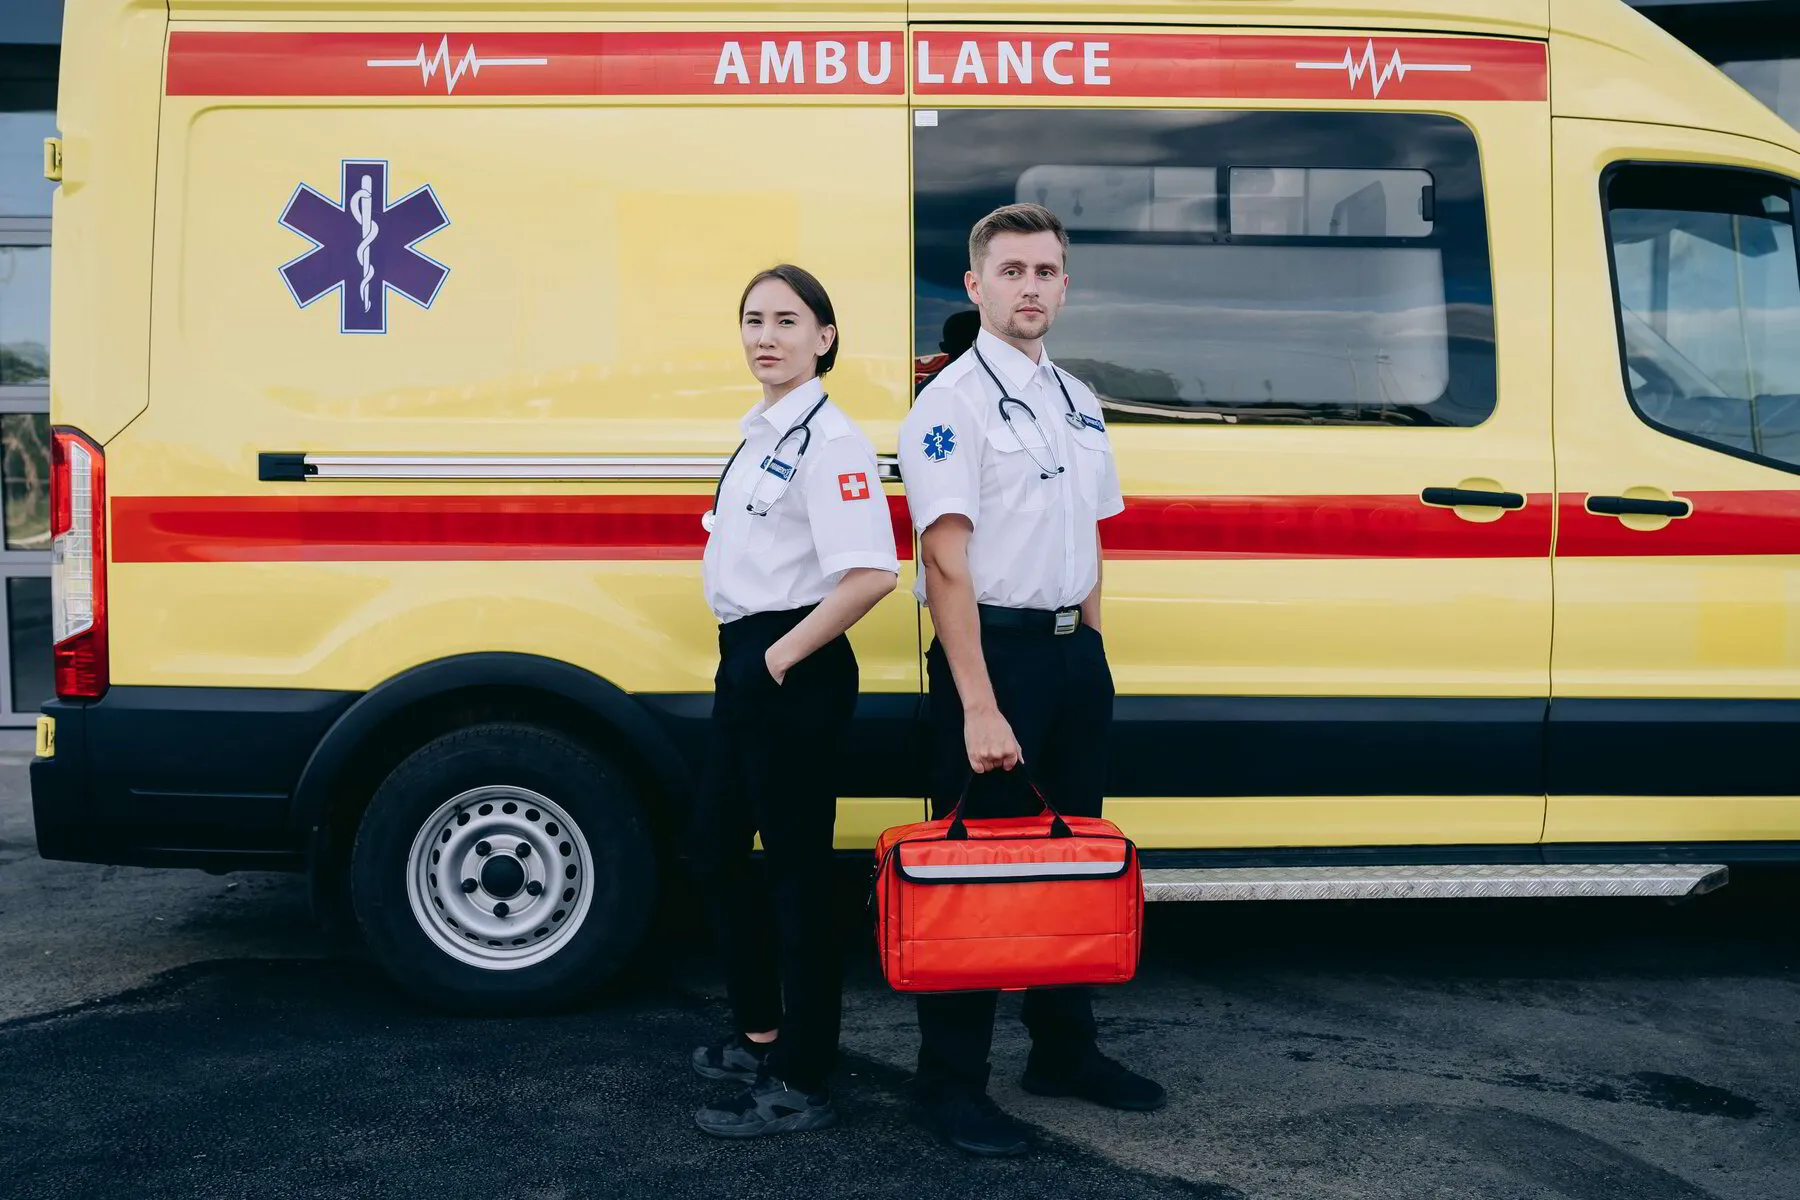 HOW DO I START AN AMBULANCE SERVICE IN SOUTH AFRICA?